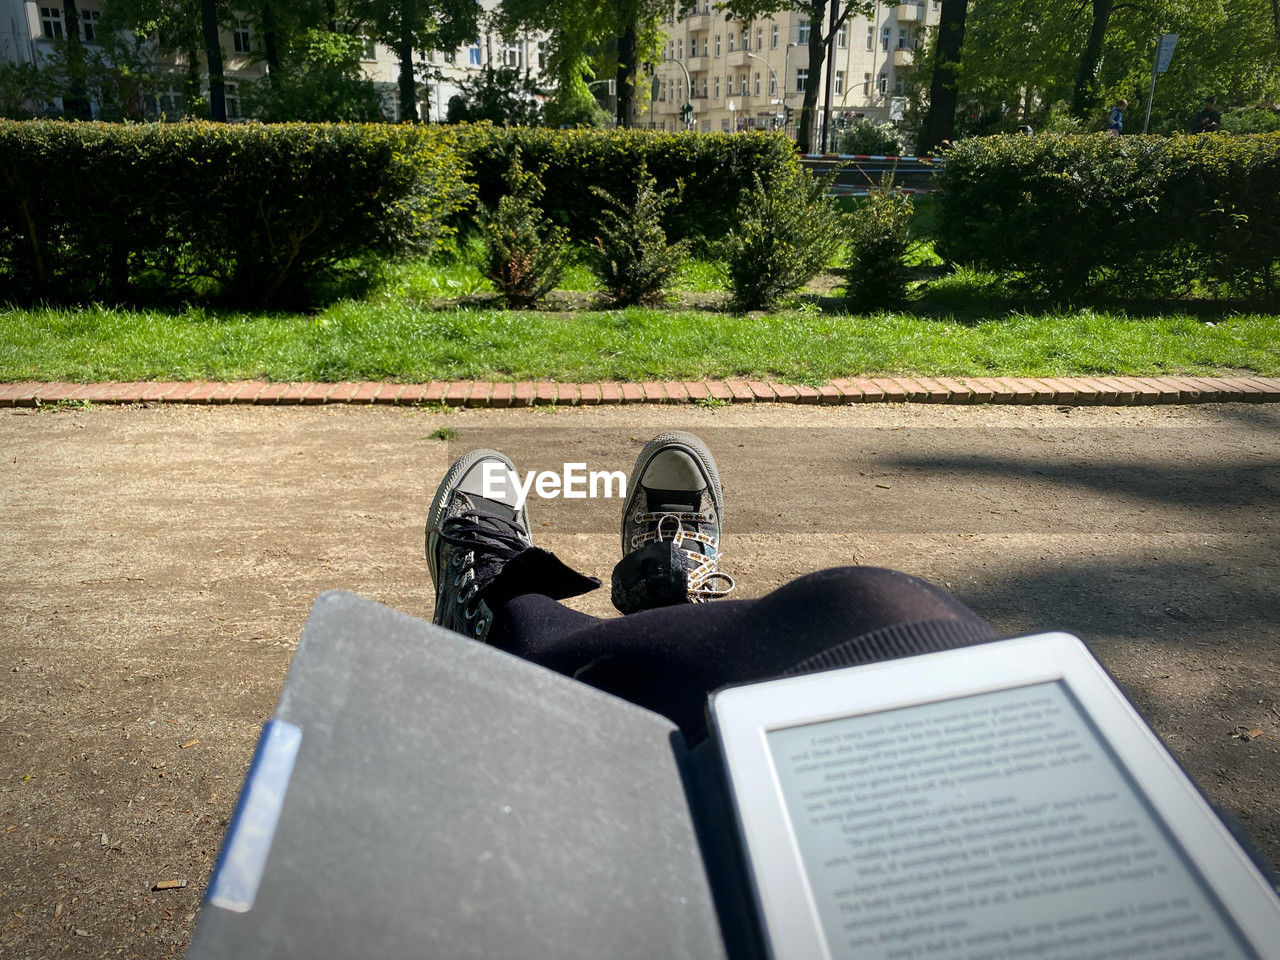 plant, human leg, low section, one person, day, nature, shoe, men, lifestyles, leisure activity, personal perspective, sunlight, footwear, tree, green, outdoors, high angle view, relaxation, sitting, grass, limb, park, book, park - man made space, publication, adult, shadow, memorial